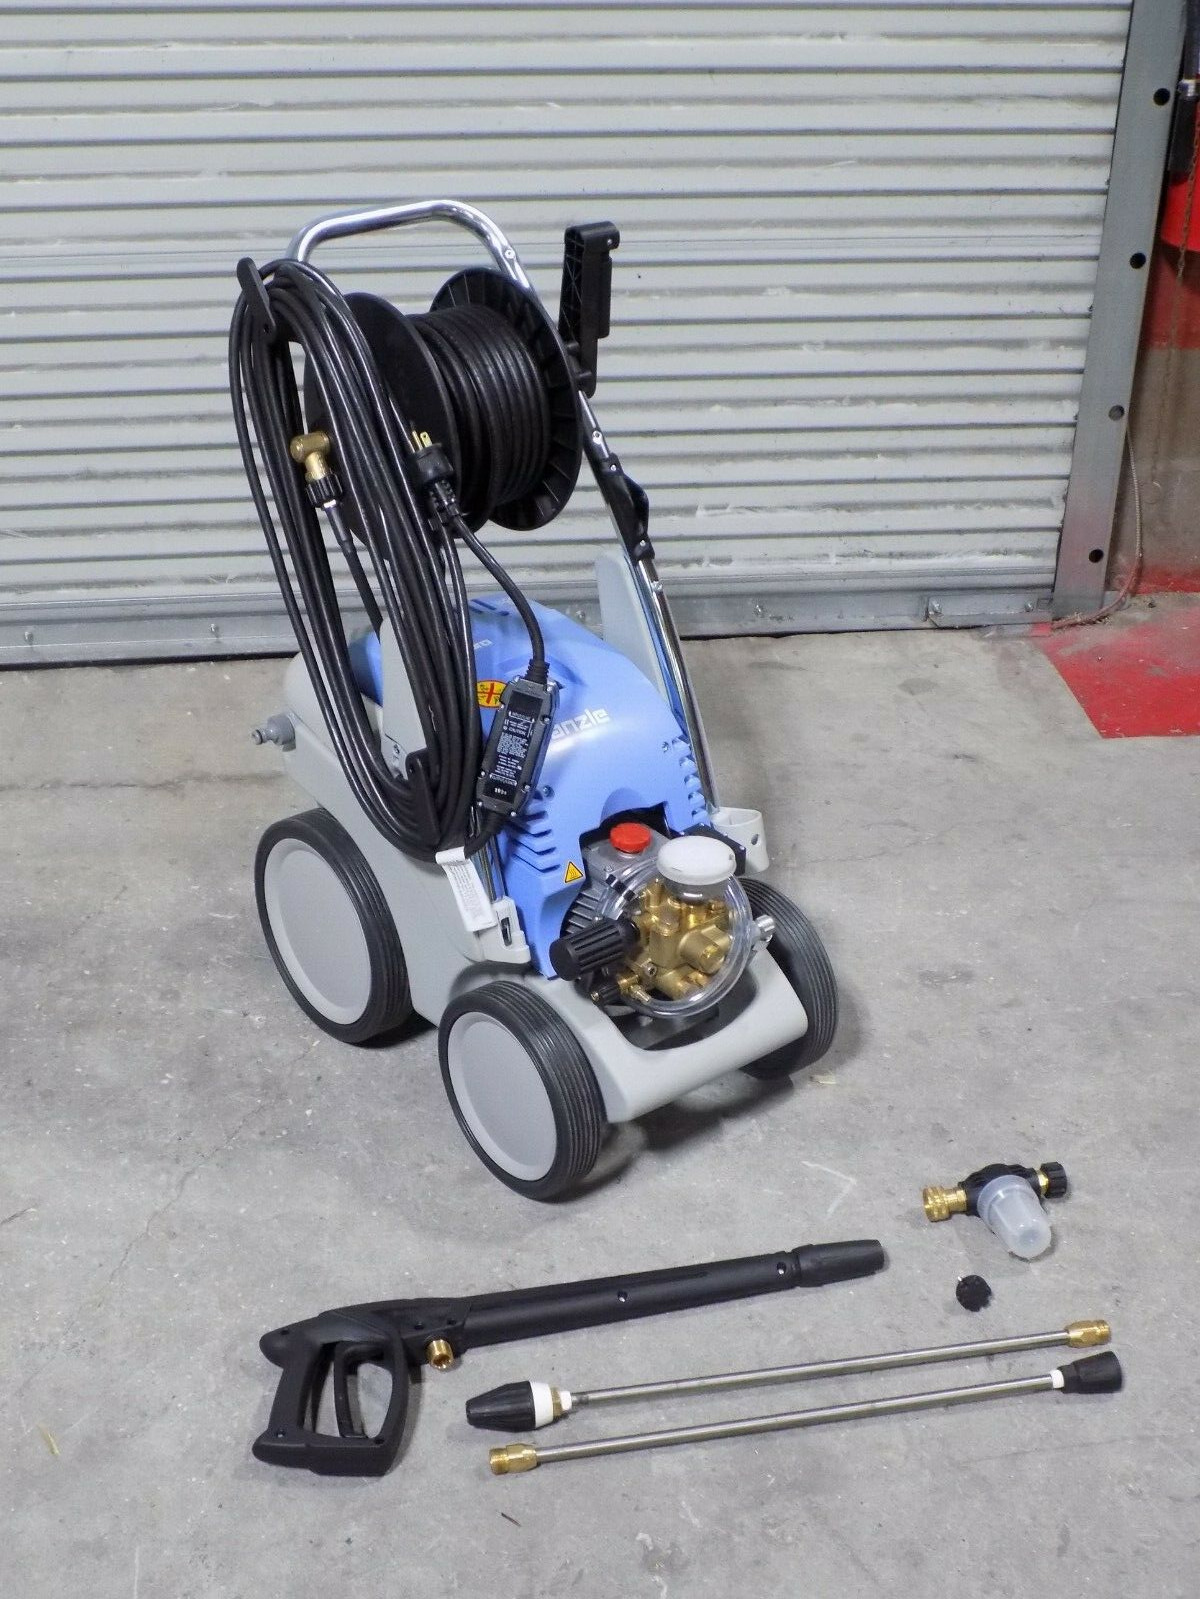 Kranzle Electric Cold Water Pressure Washer 1.9 Gpm 2000 Psi 115v Damaged